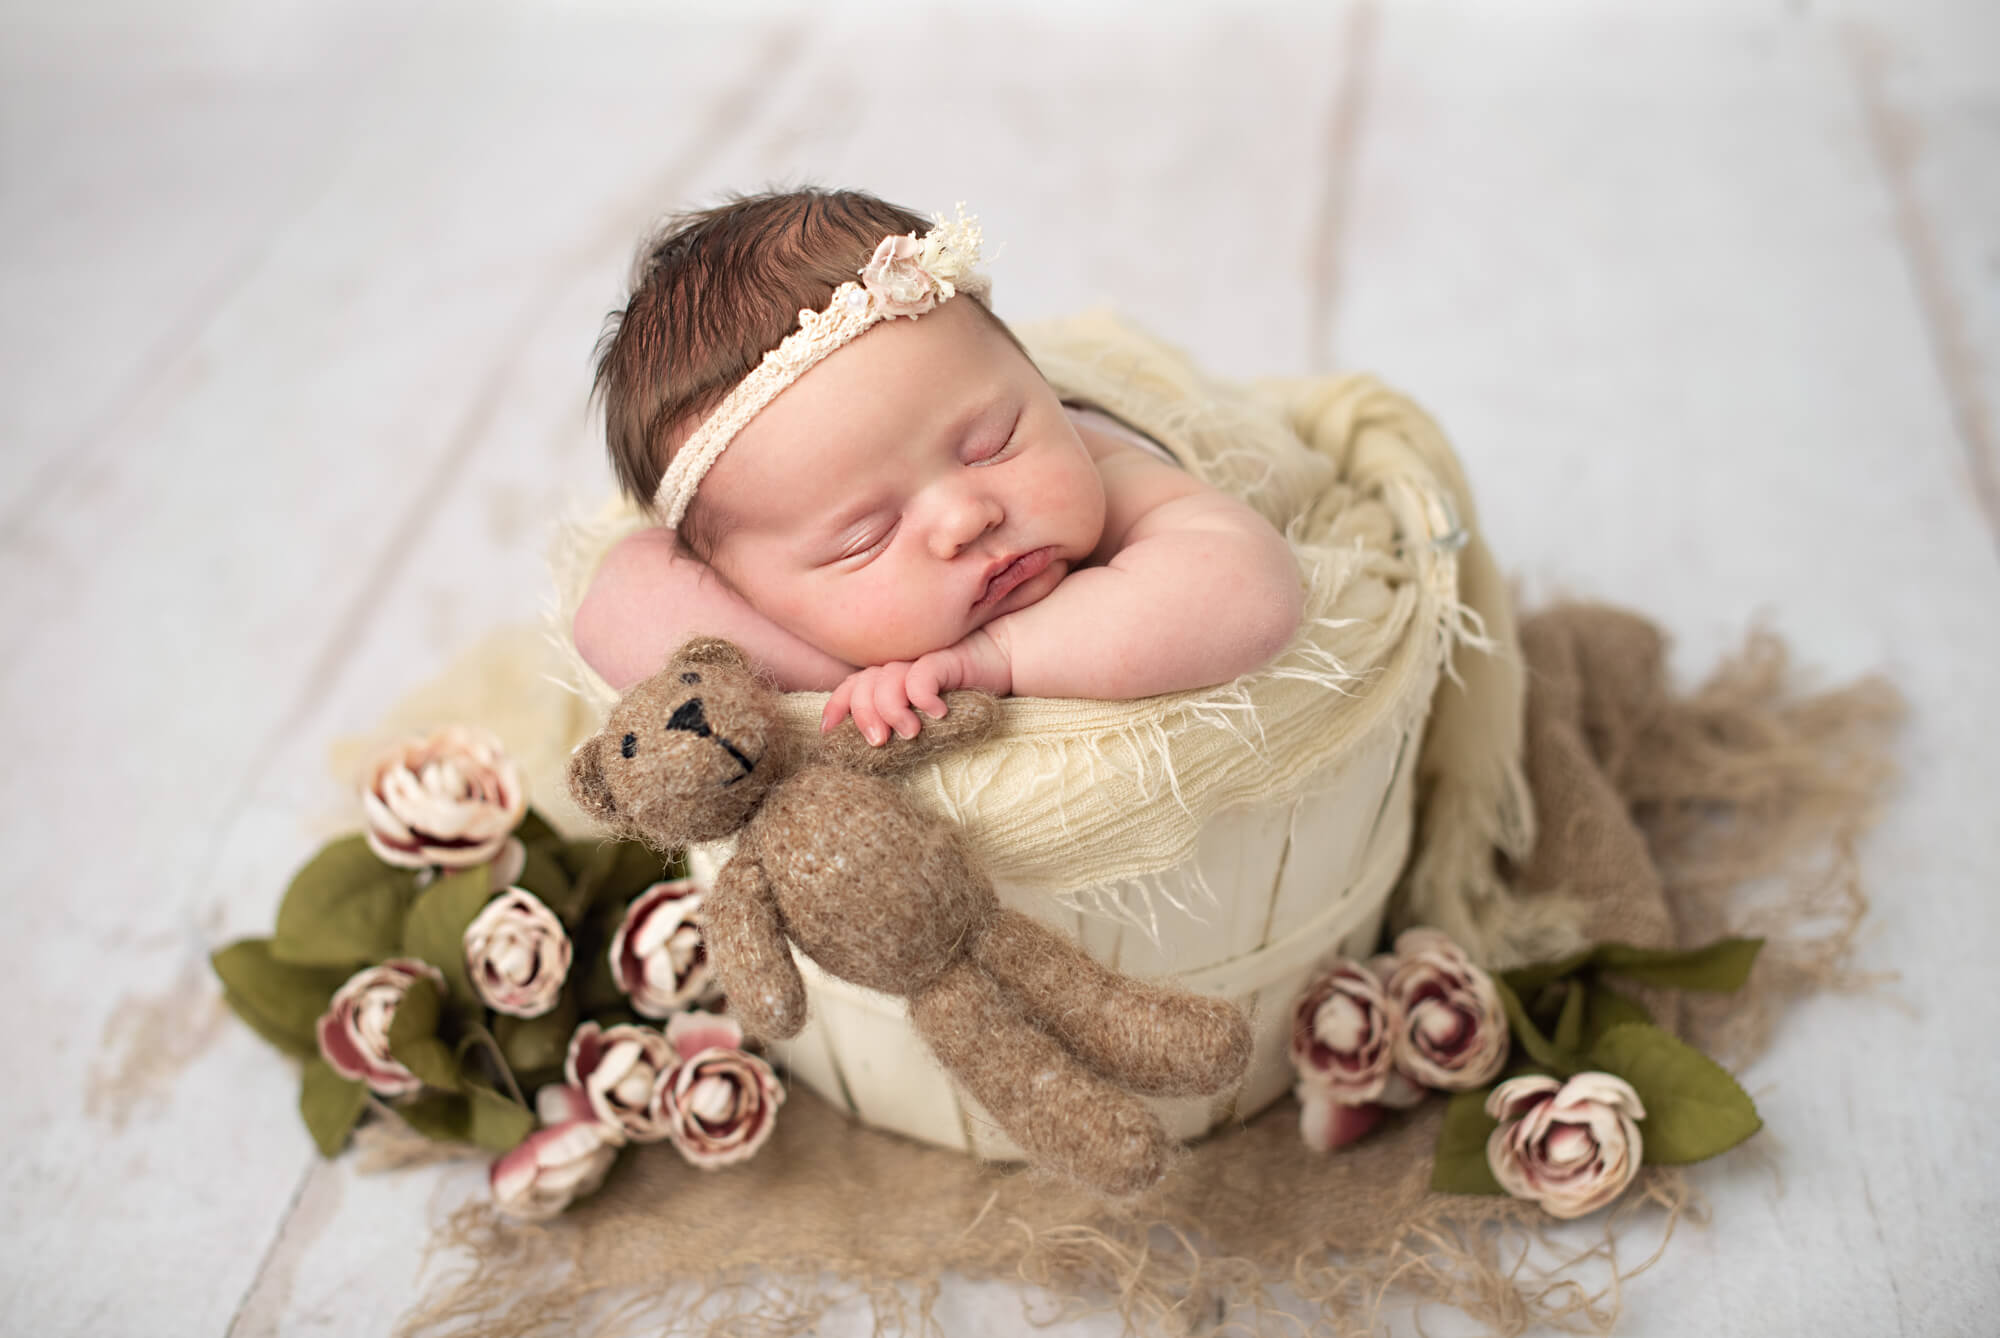 newborn baby laying in a basket holding a teddy bear Edmonton Baby Stores